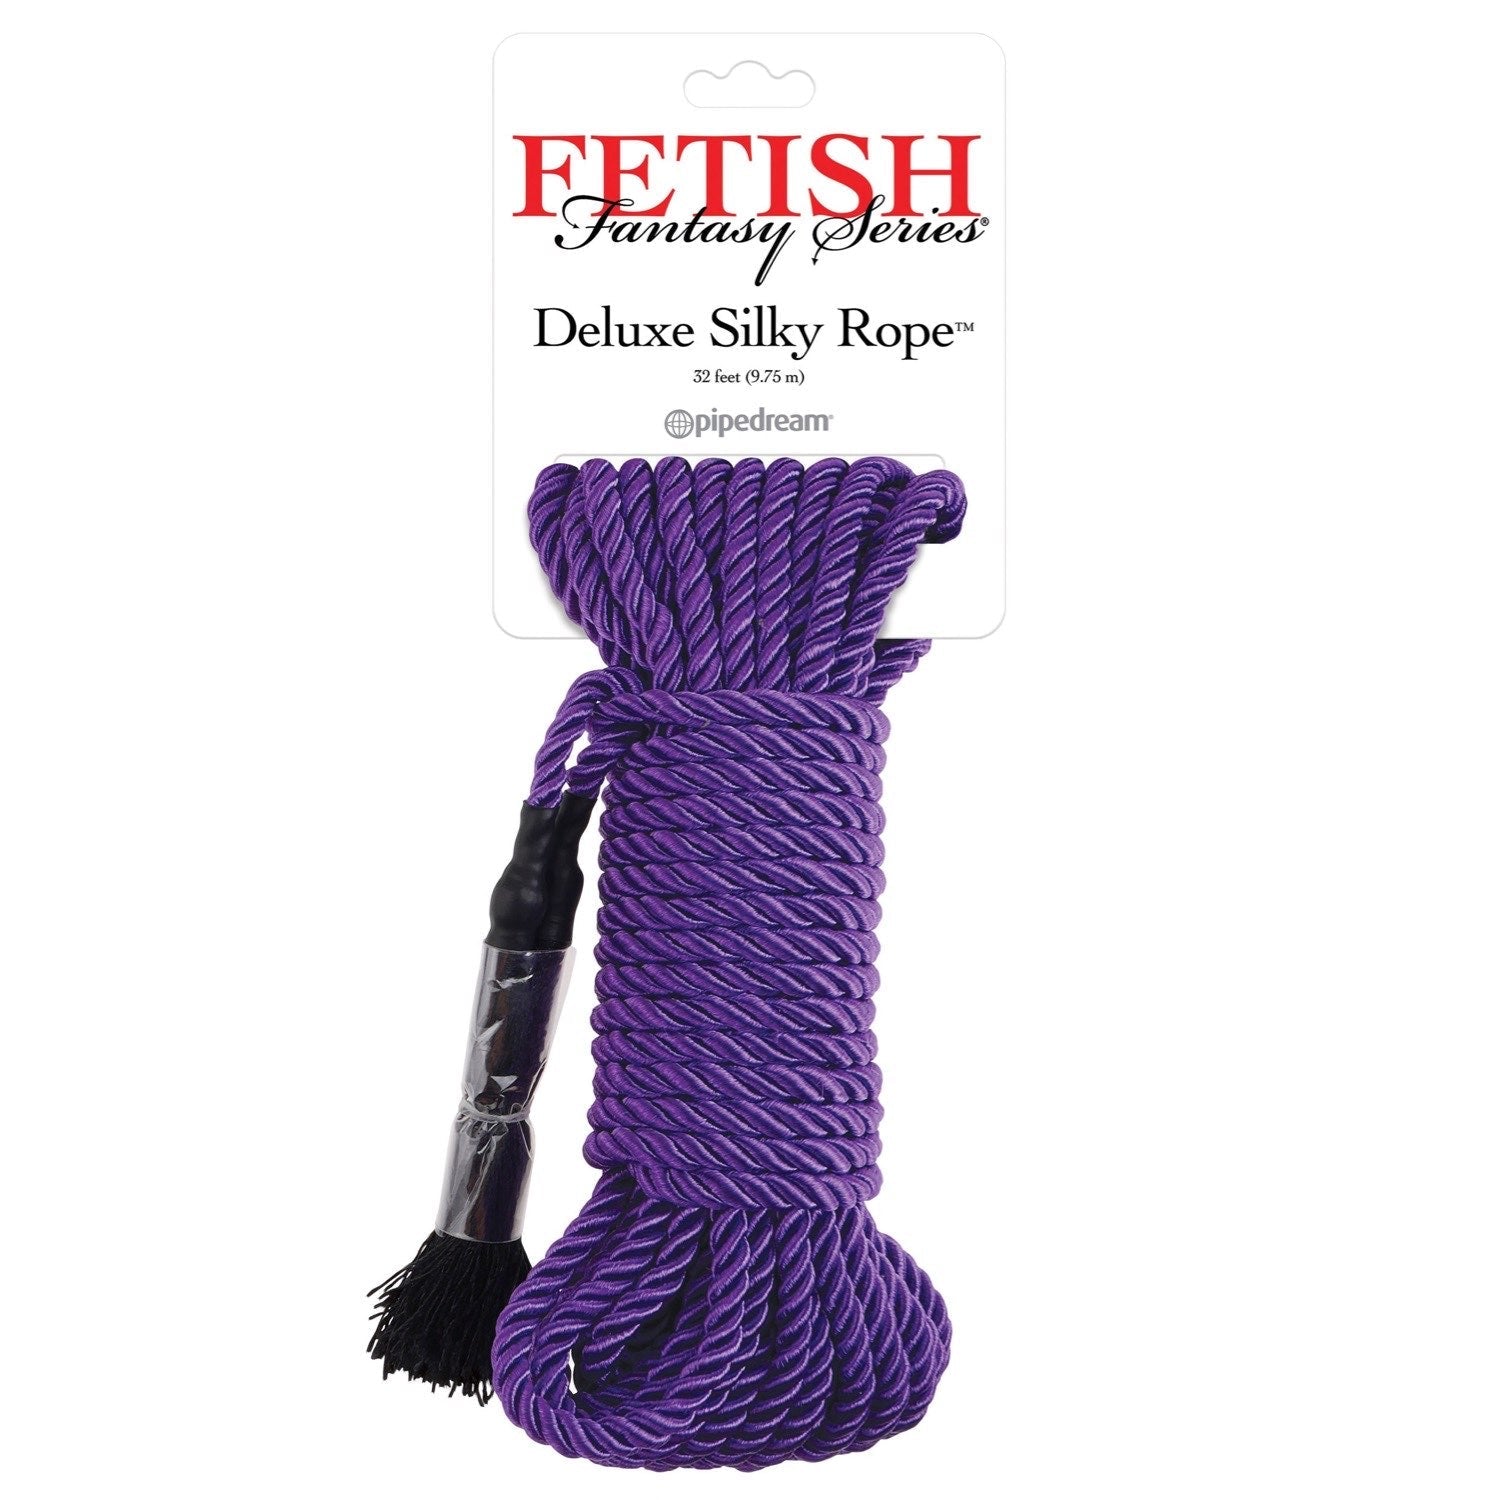 Fetish Fantasy Series Deluxe Silky Rope - Purple Bondage Rope - 9.75 m Length by Pipedream